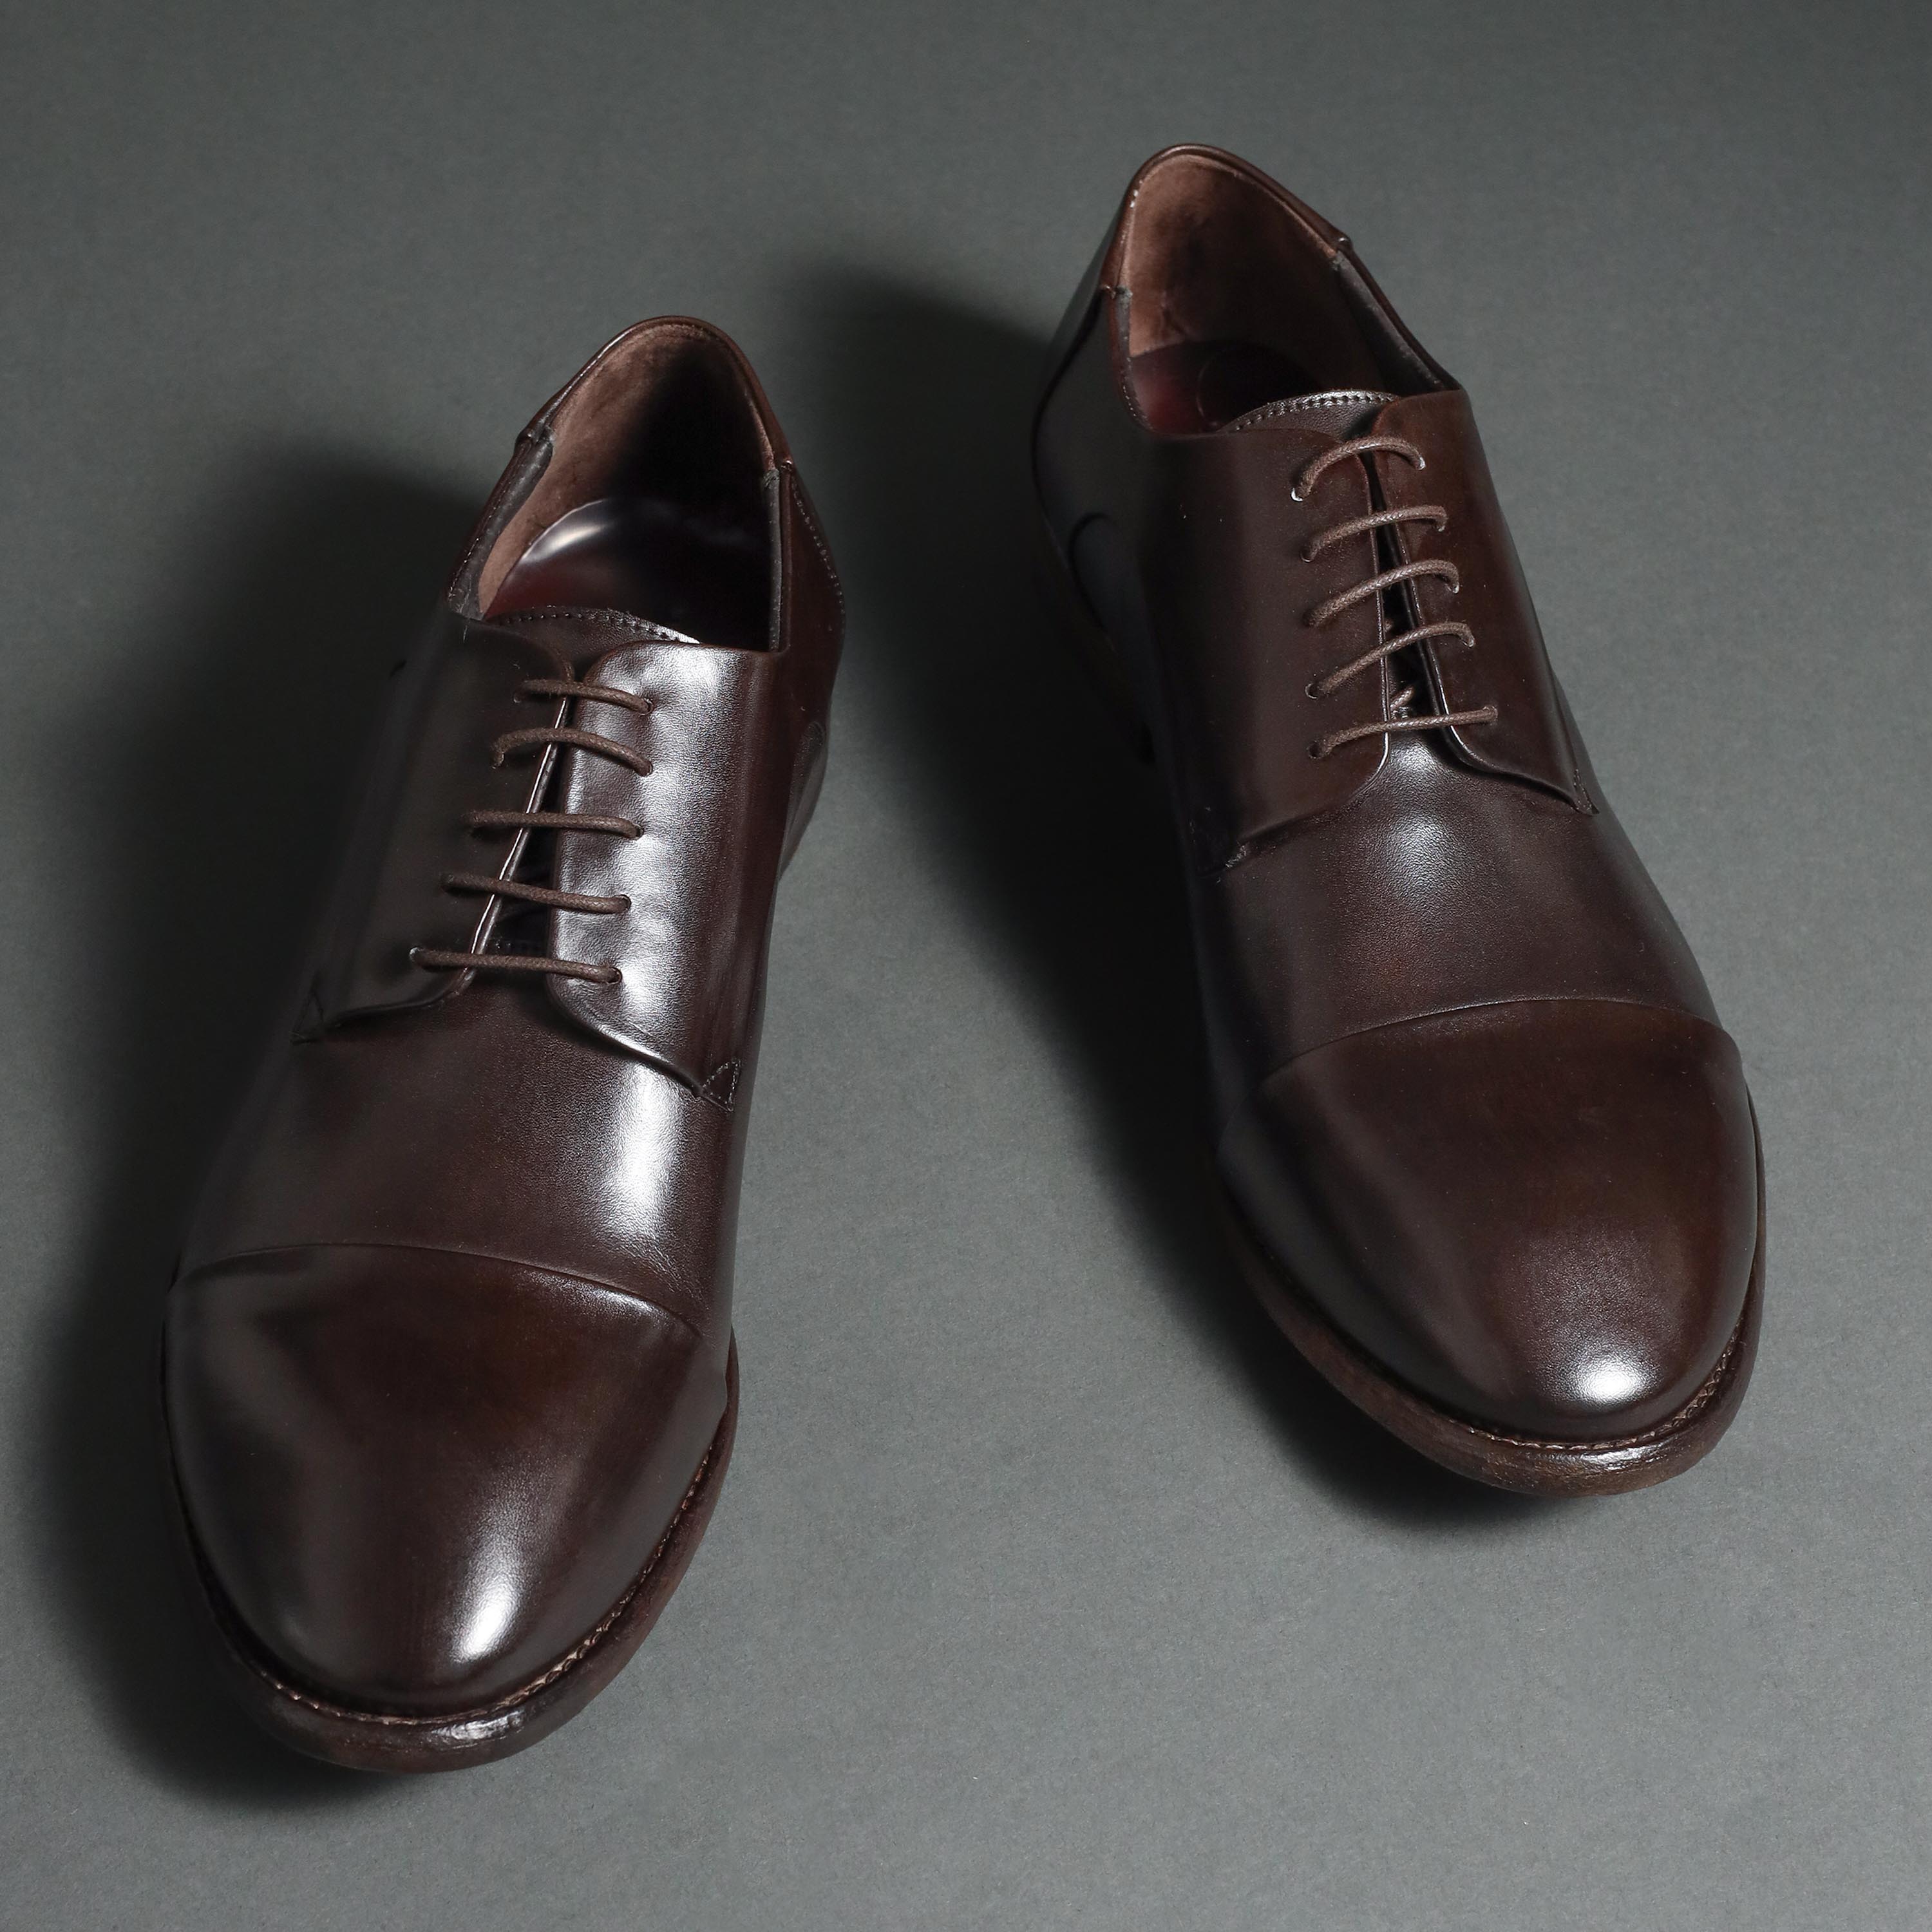 Conflict For Interest Lace Up Derby Conflict For Interest Modena Dark Brown